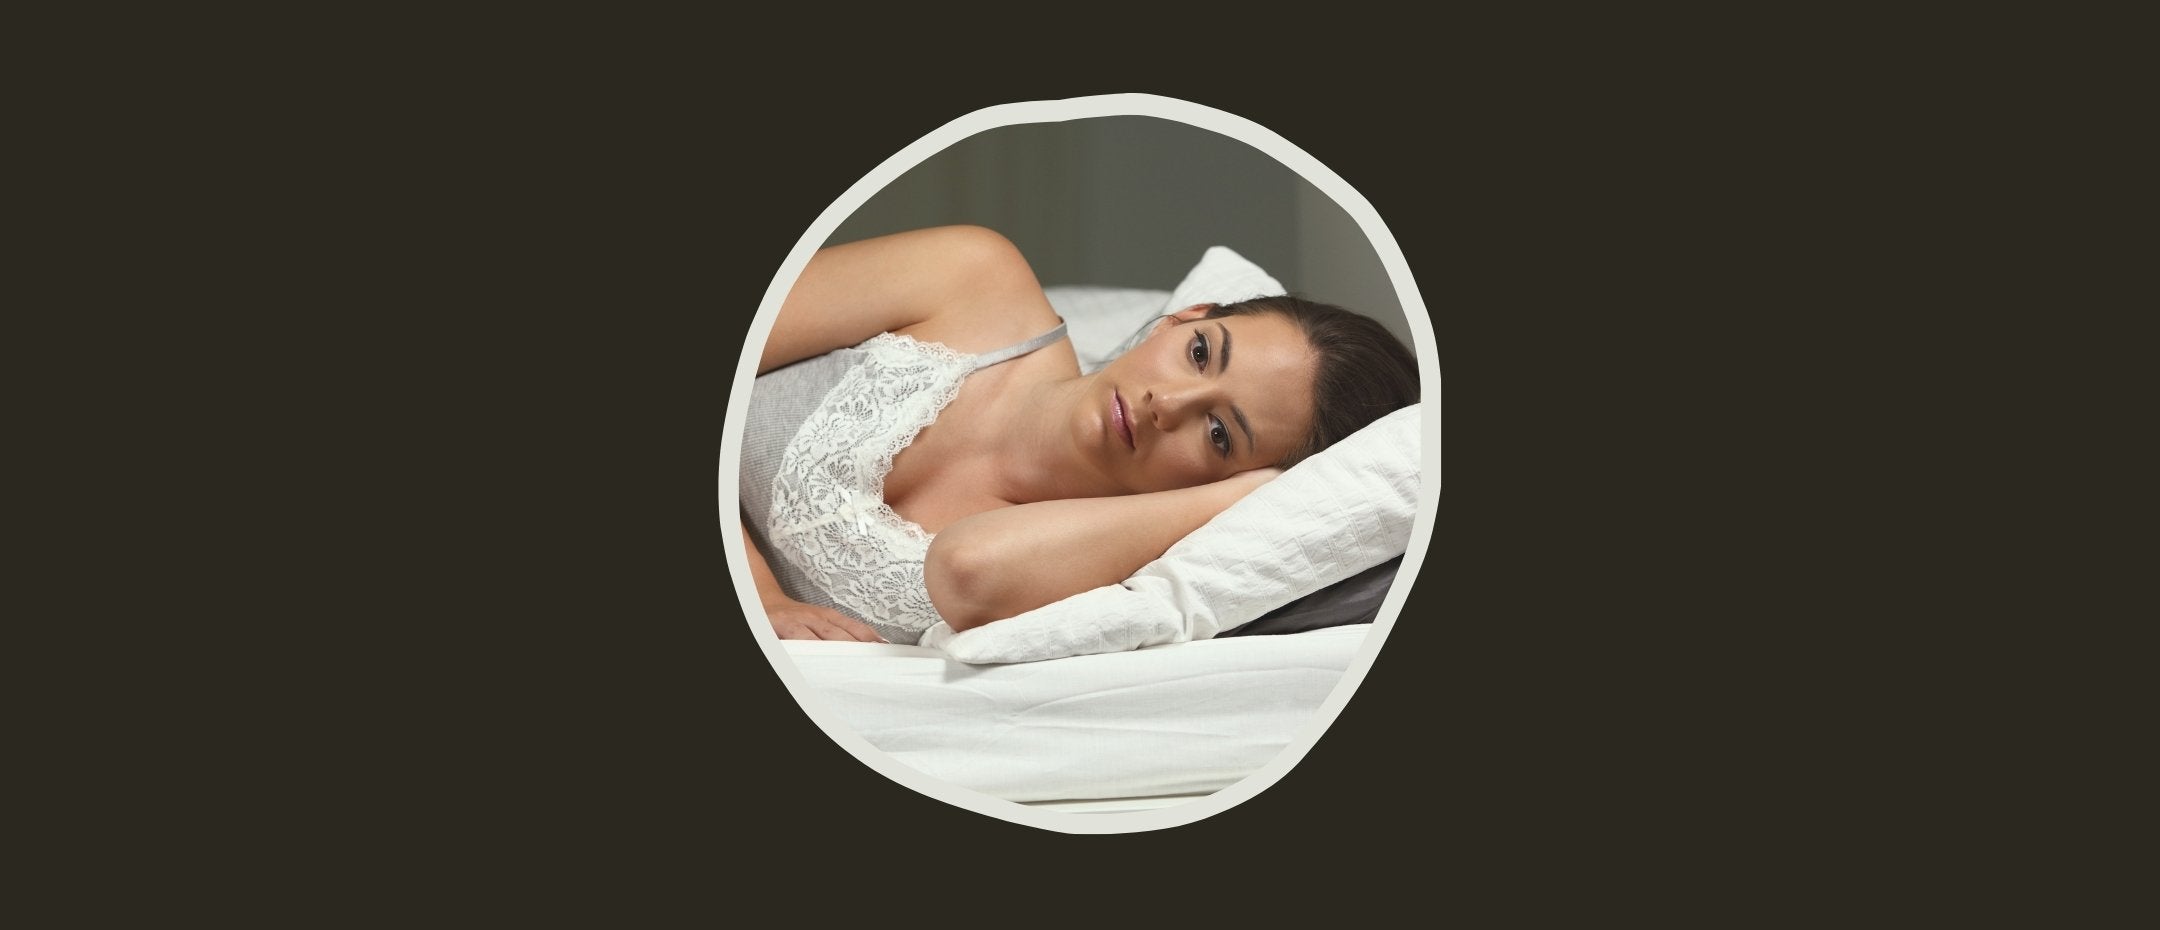 Woman suffering from insomnia in bed